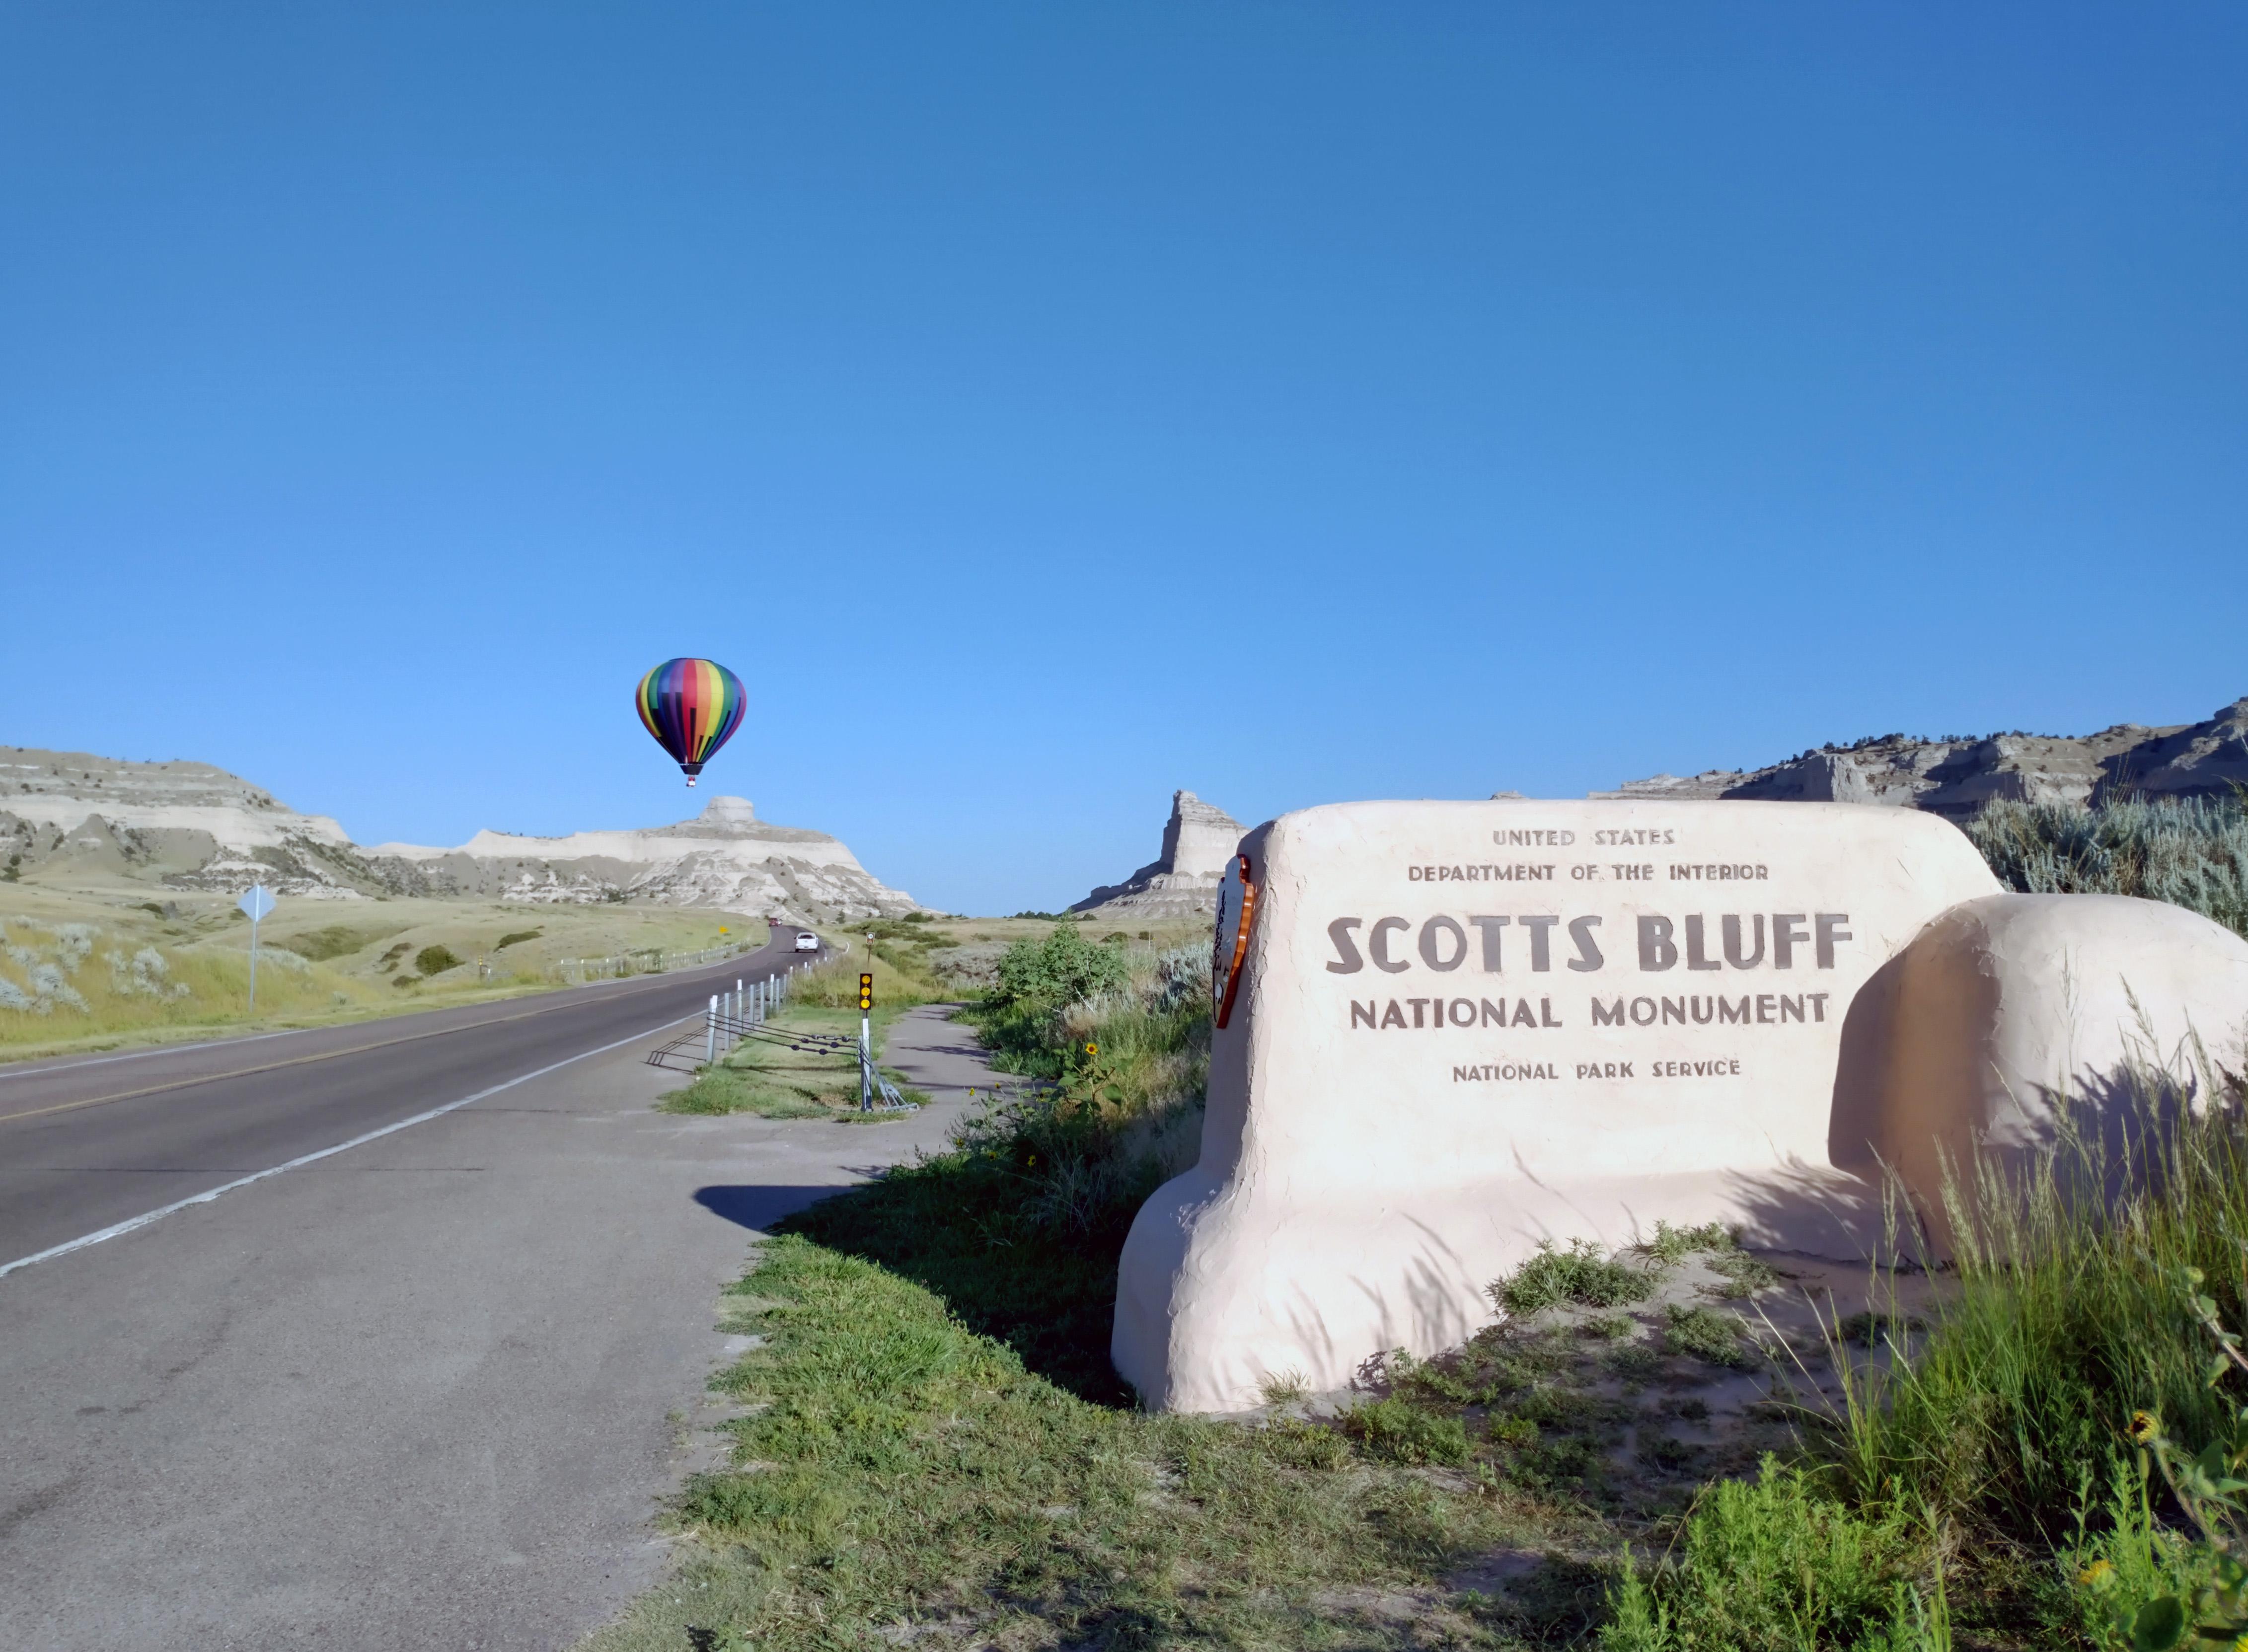 A colorful hot air balloon is seen in the distance with the Scotts Bluff entrance sign.